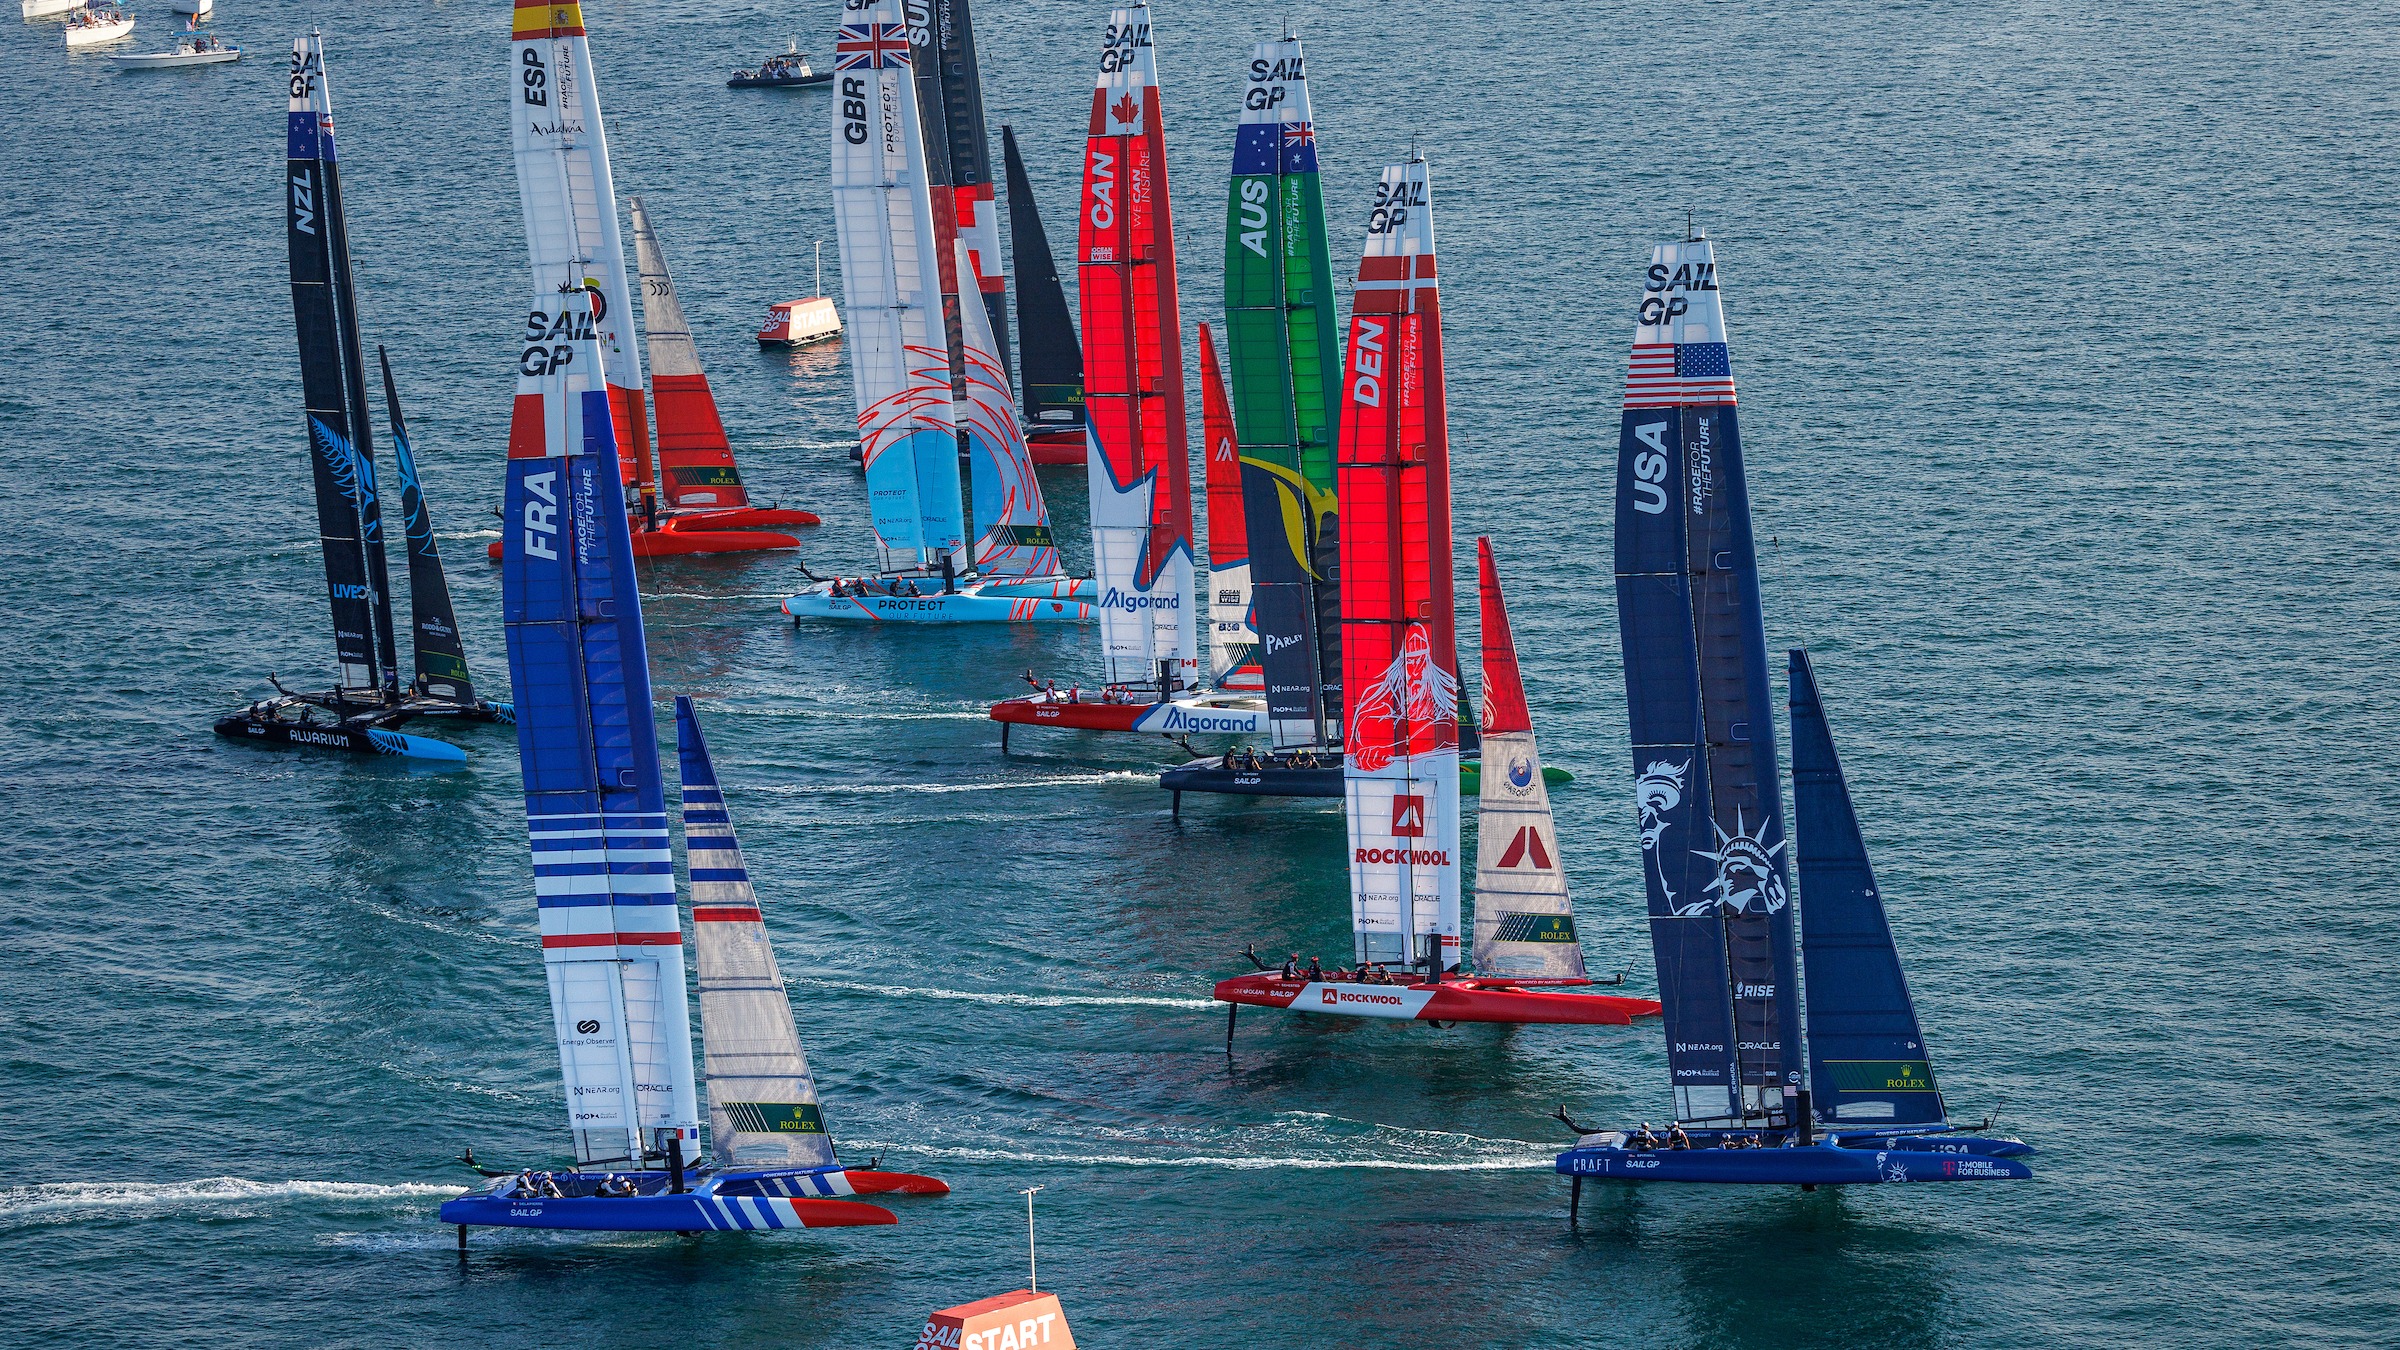 The fleet blasts over the start line on the first day of racing 